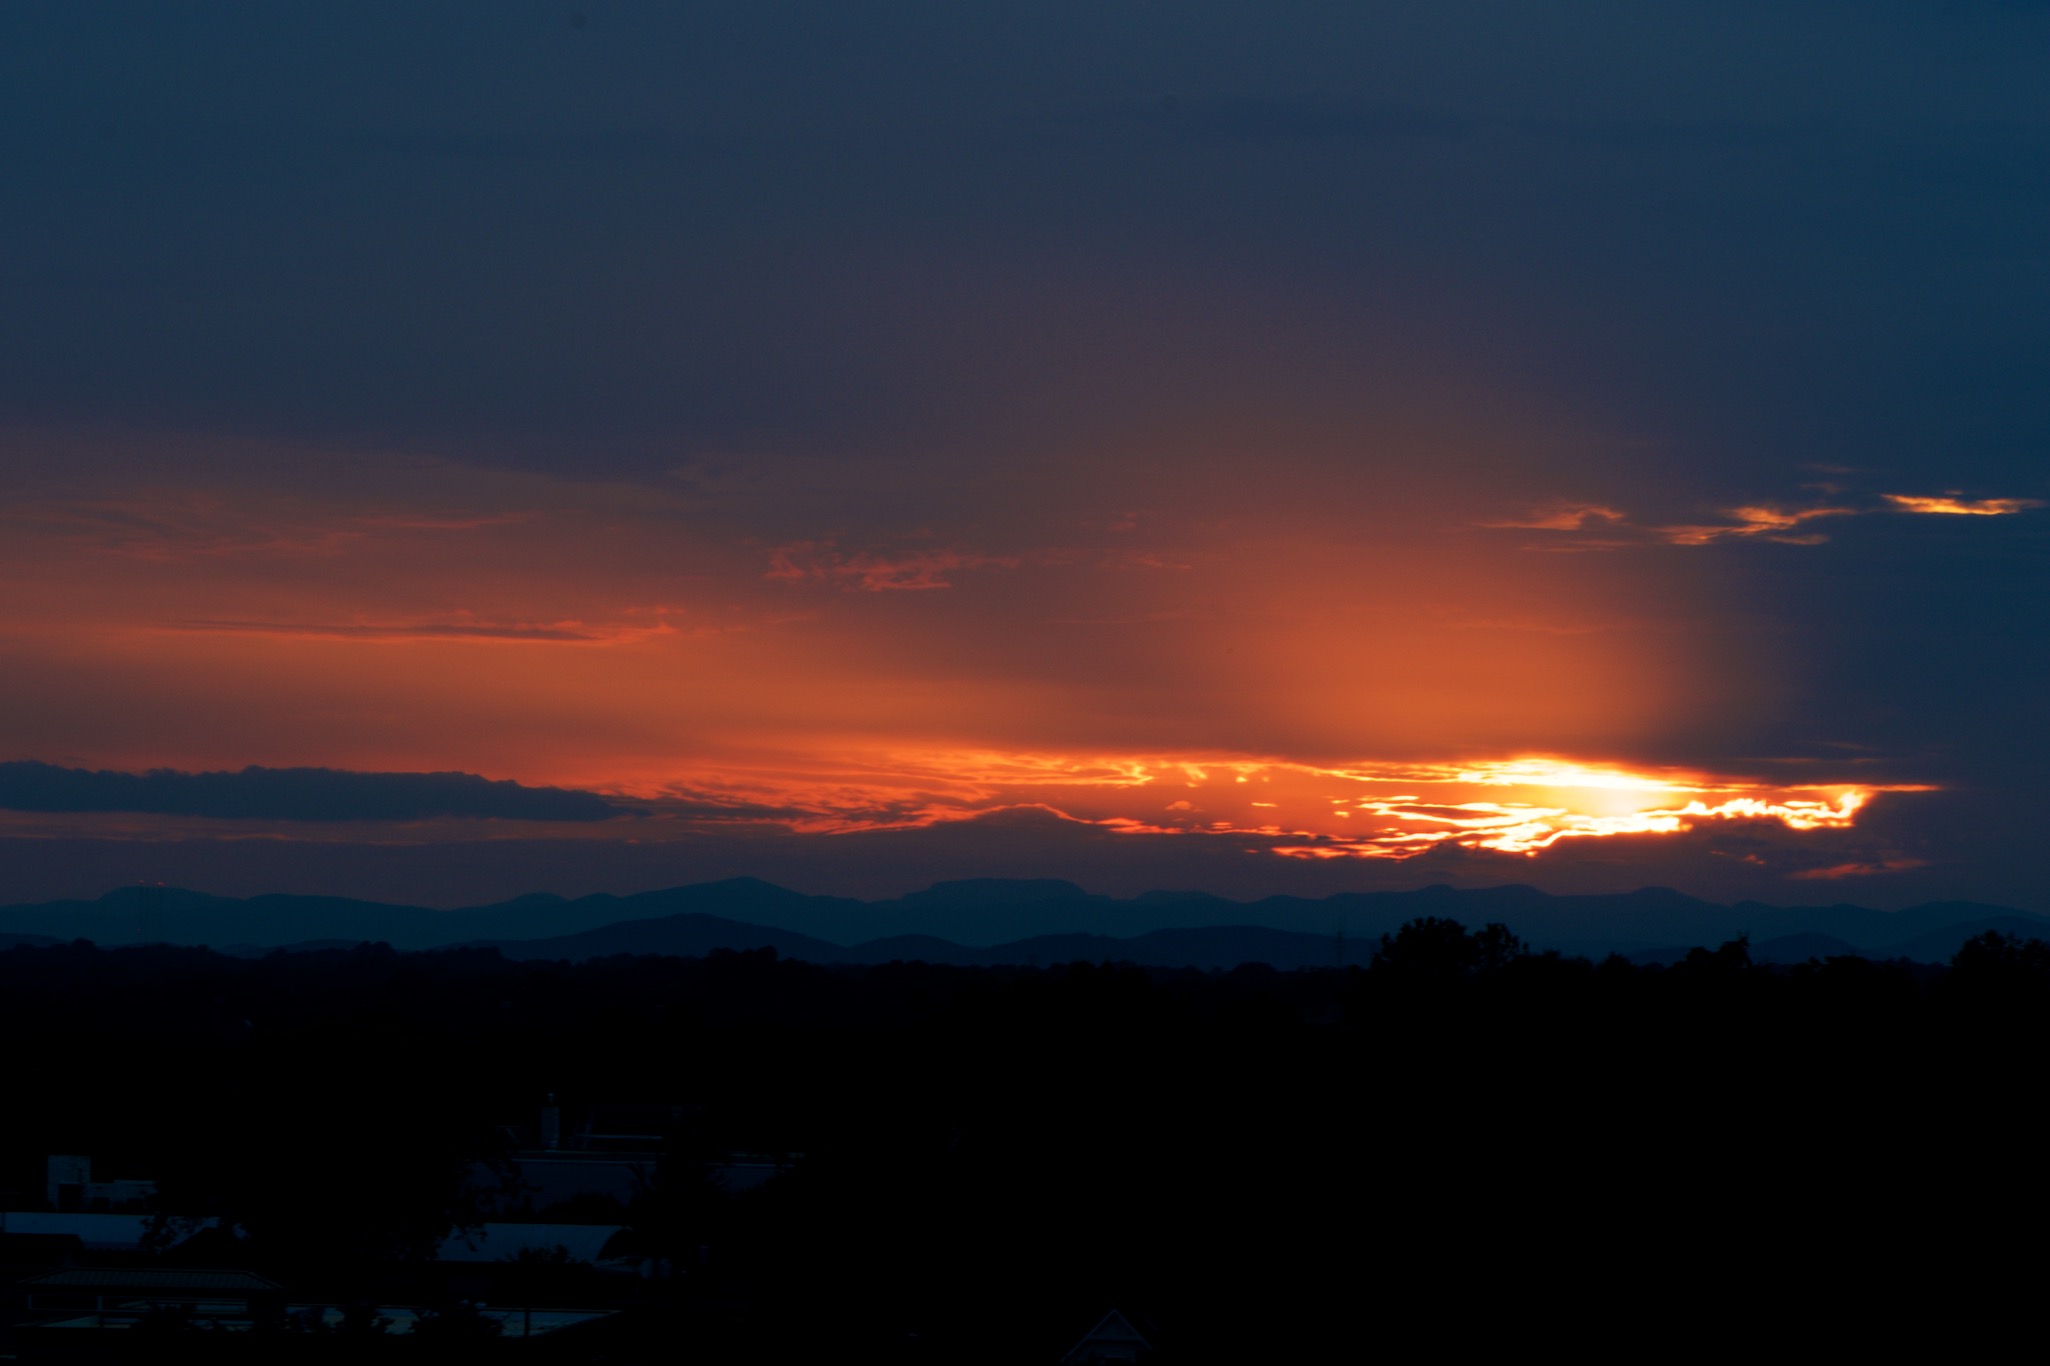 View of the Sunset over the Blue Ridge Mountains from Greenville, South Carolina